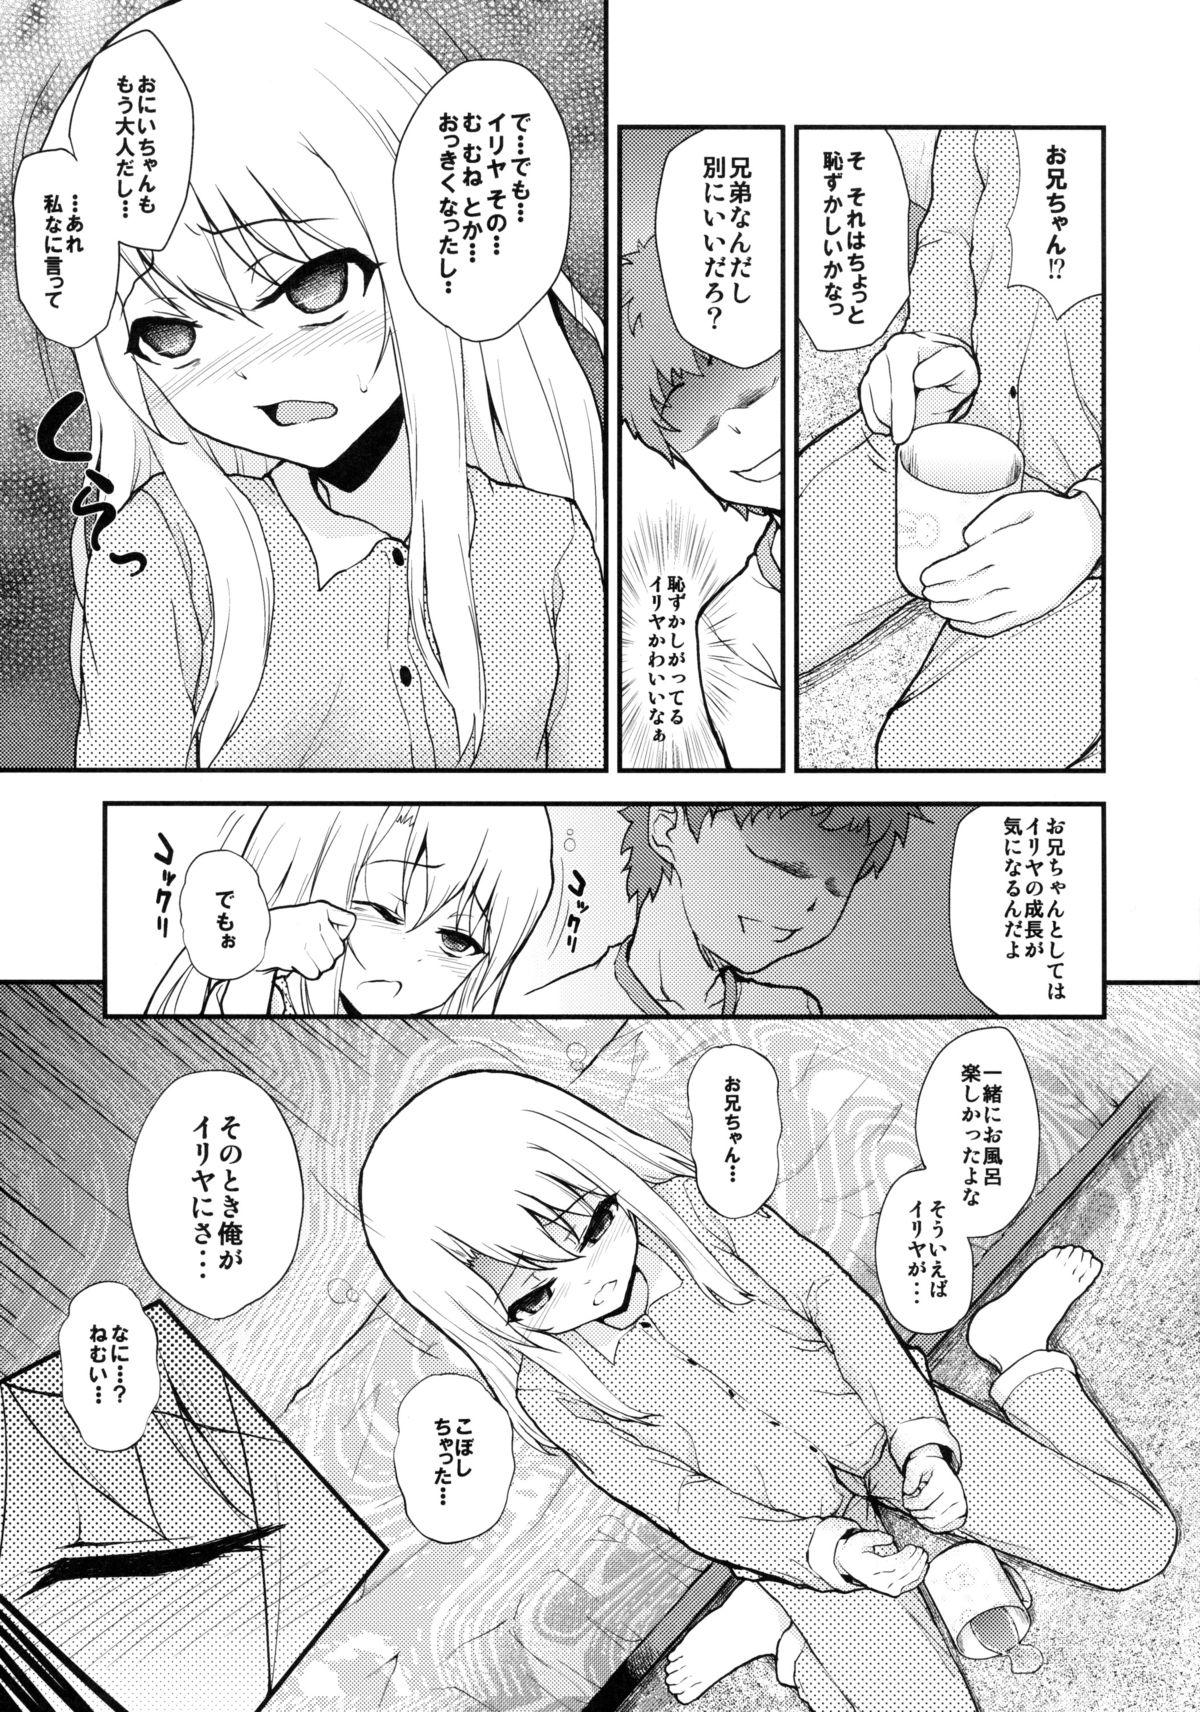 Culito Illya Doll - Fate kaleid liner prisma illya Shecock - Page 5